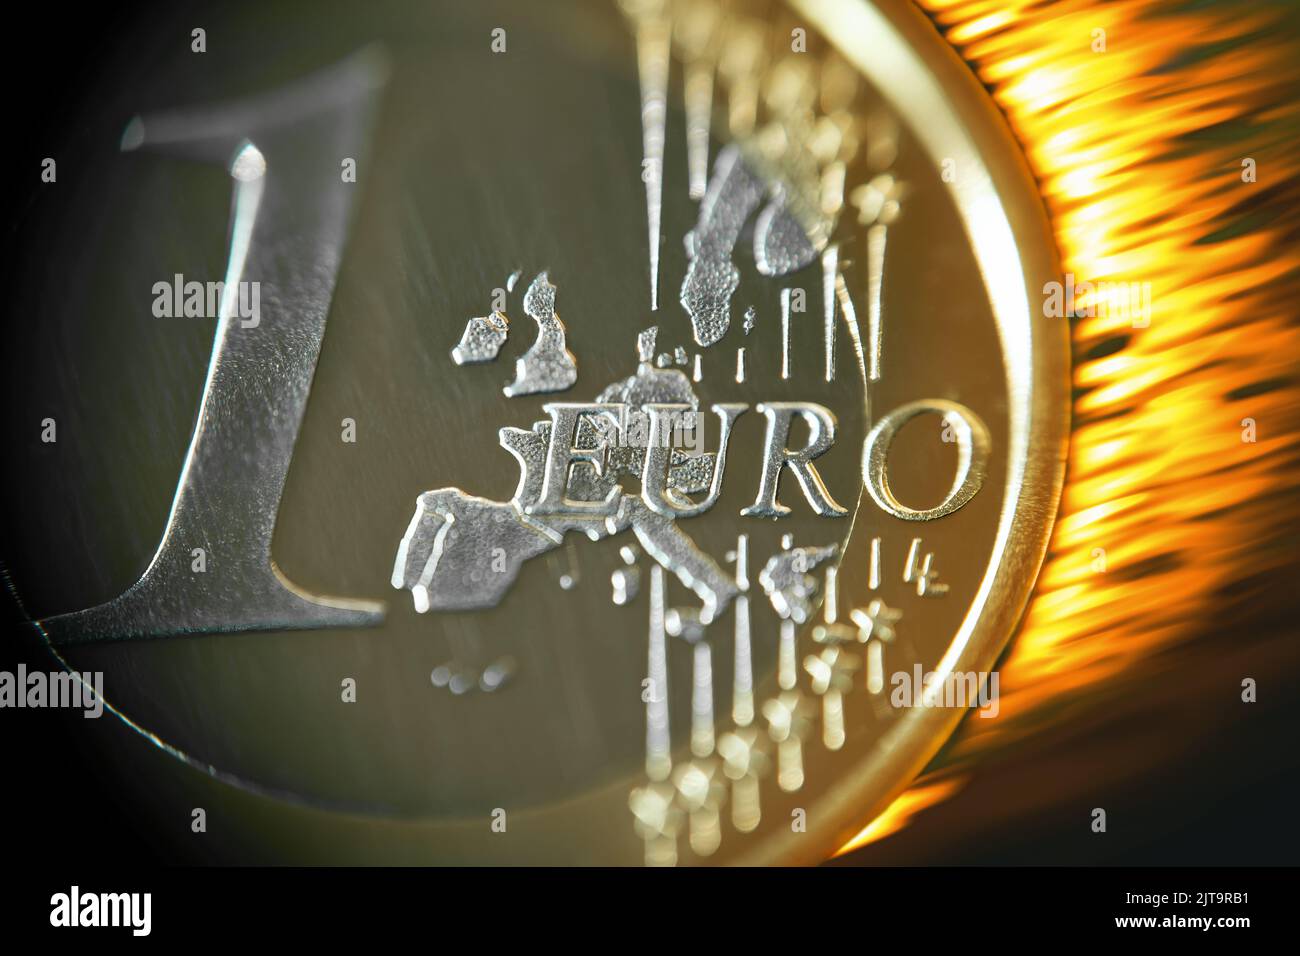 One euro coin, burning fiery, close up. Stock Photo